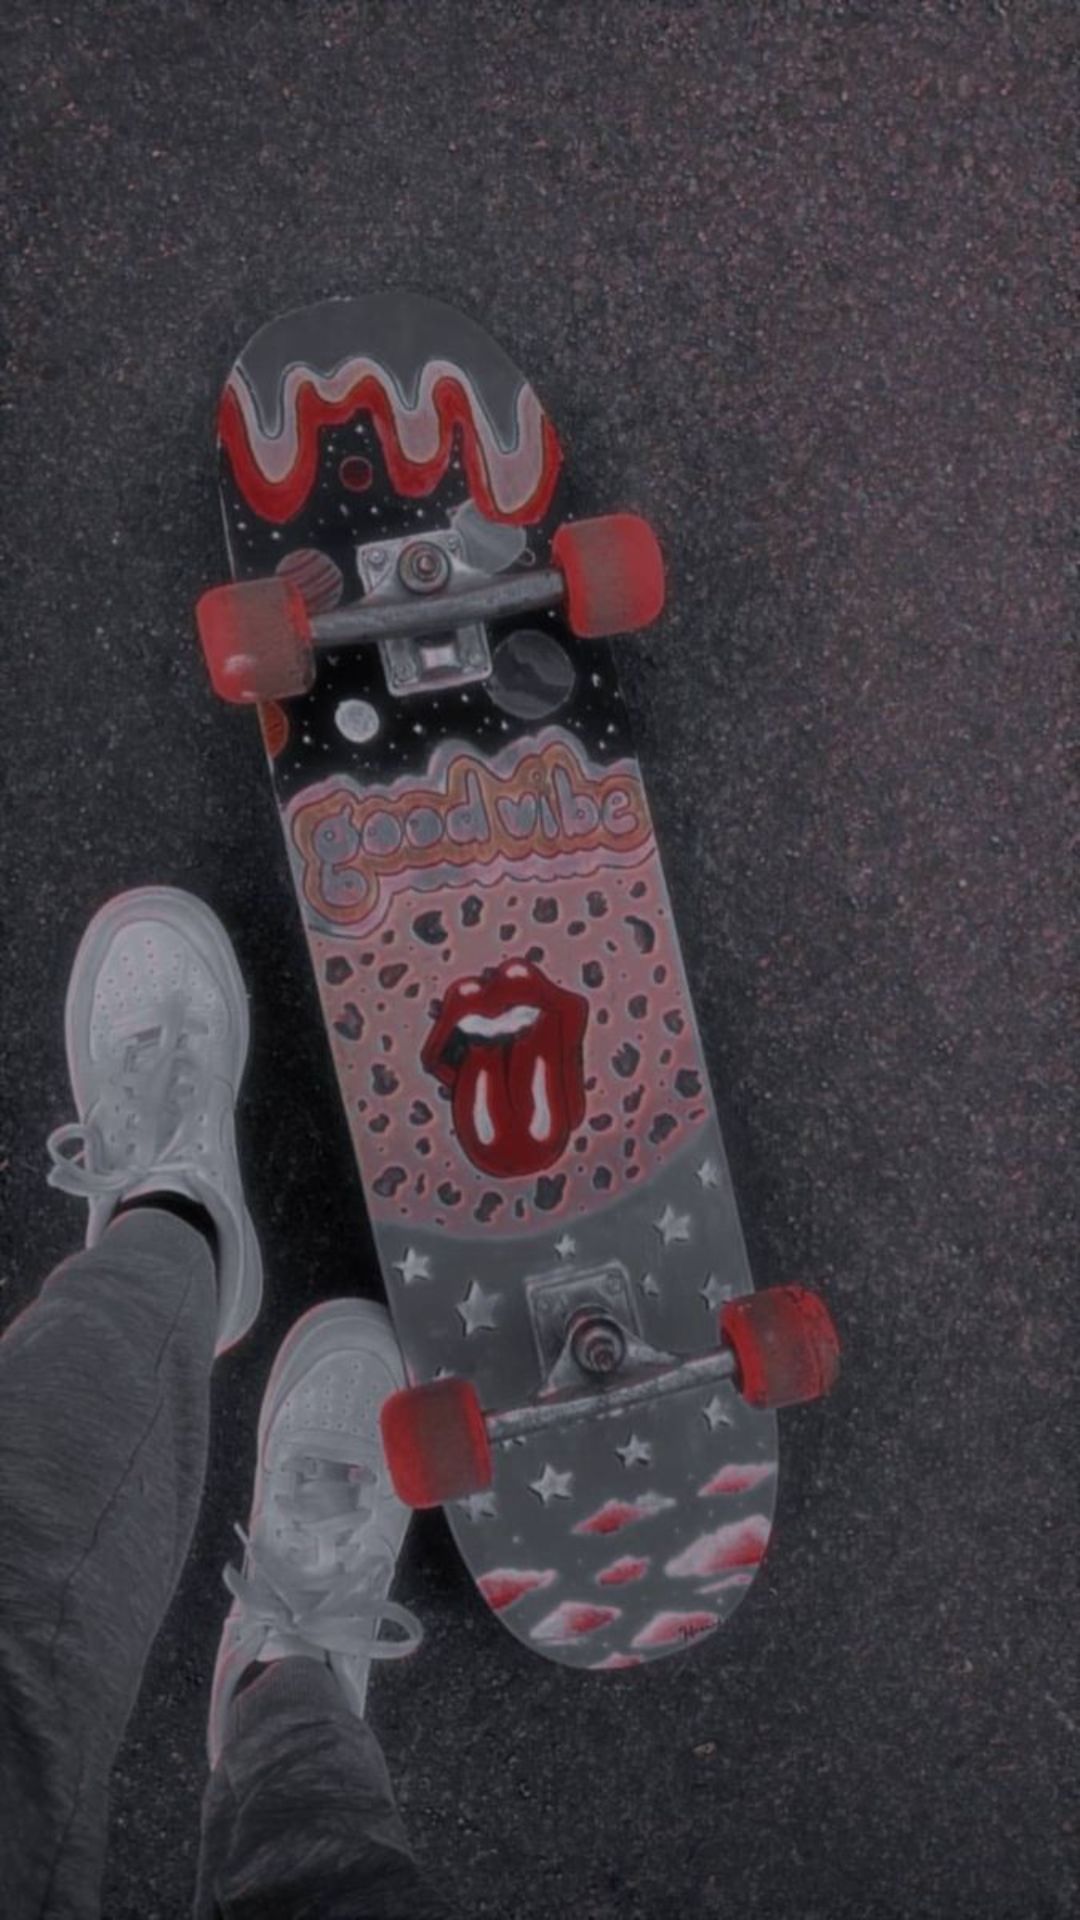 A skateboard with the rolling stones logo on it - Skate, skater